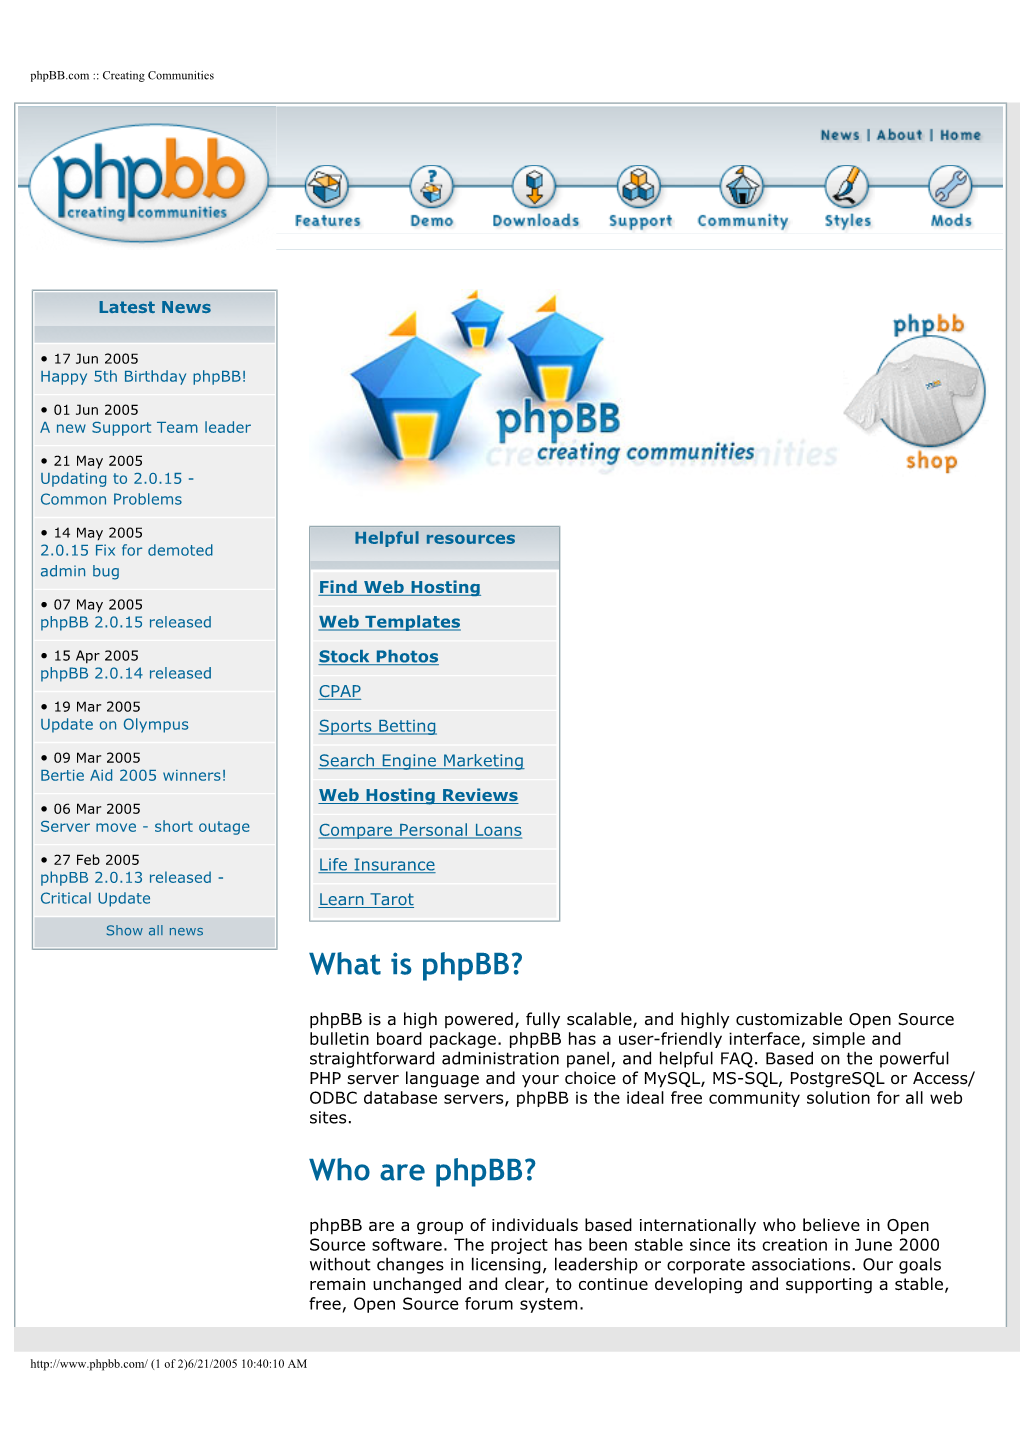 What Is Phpbb? Who Are Phpbb?